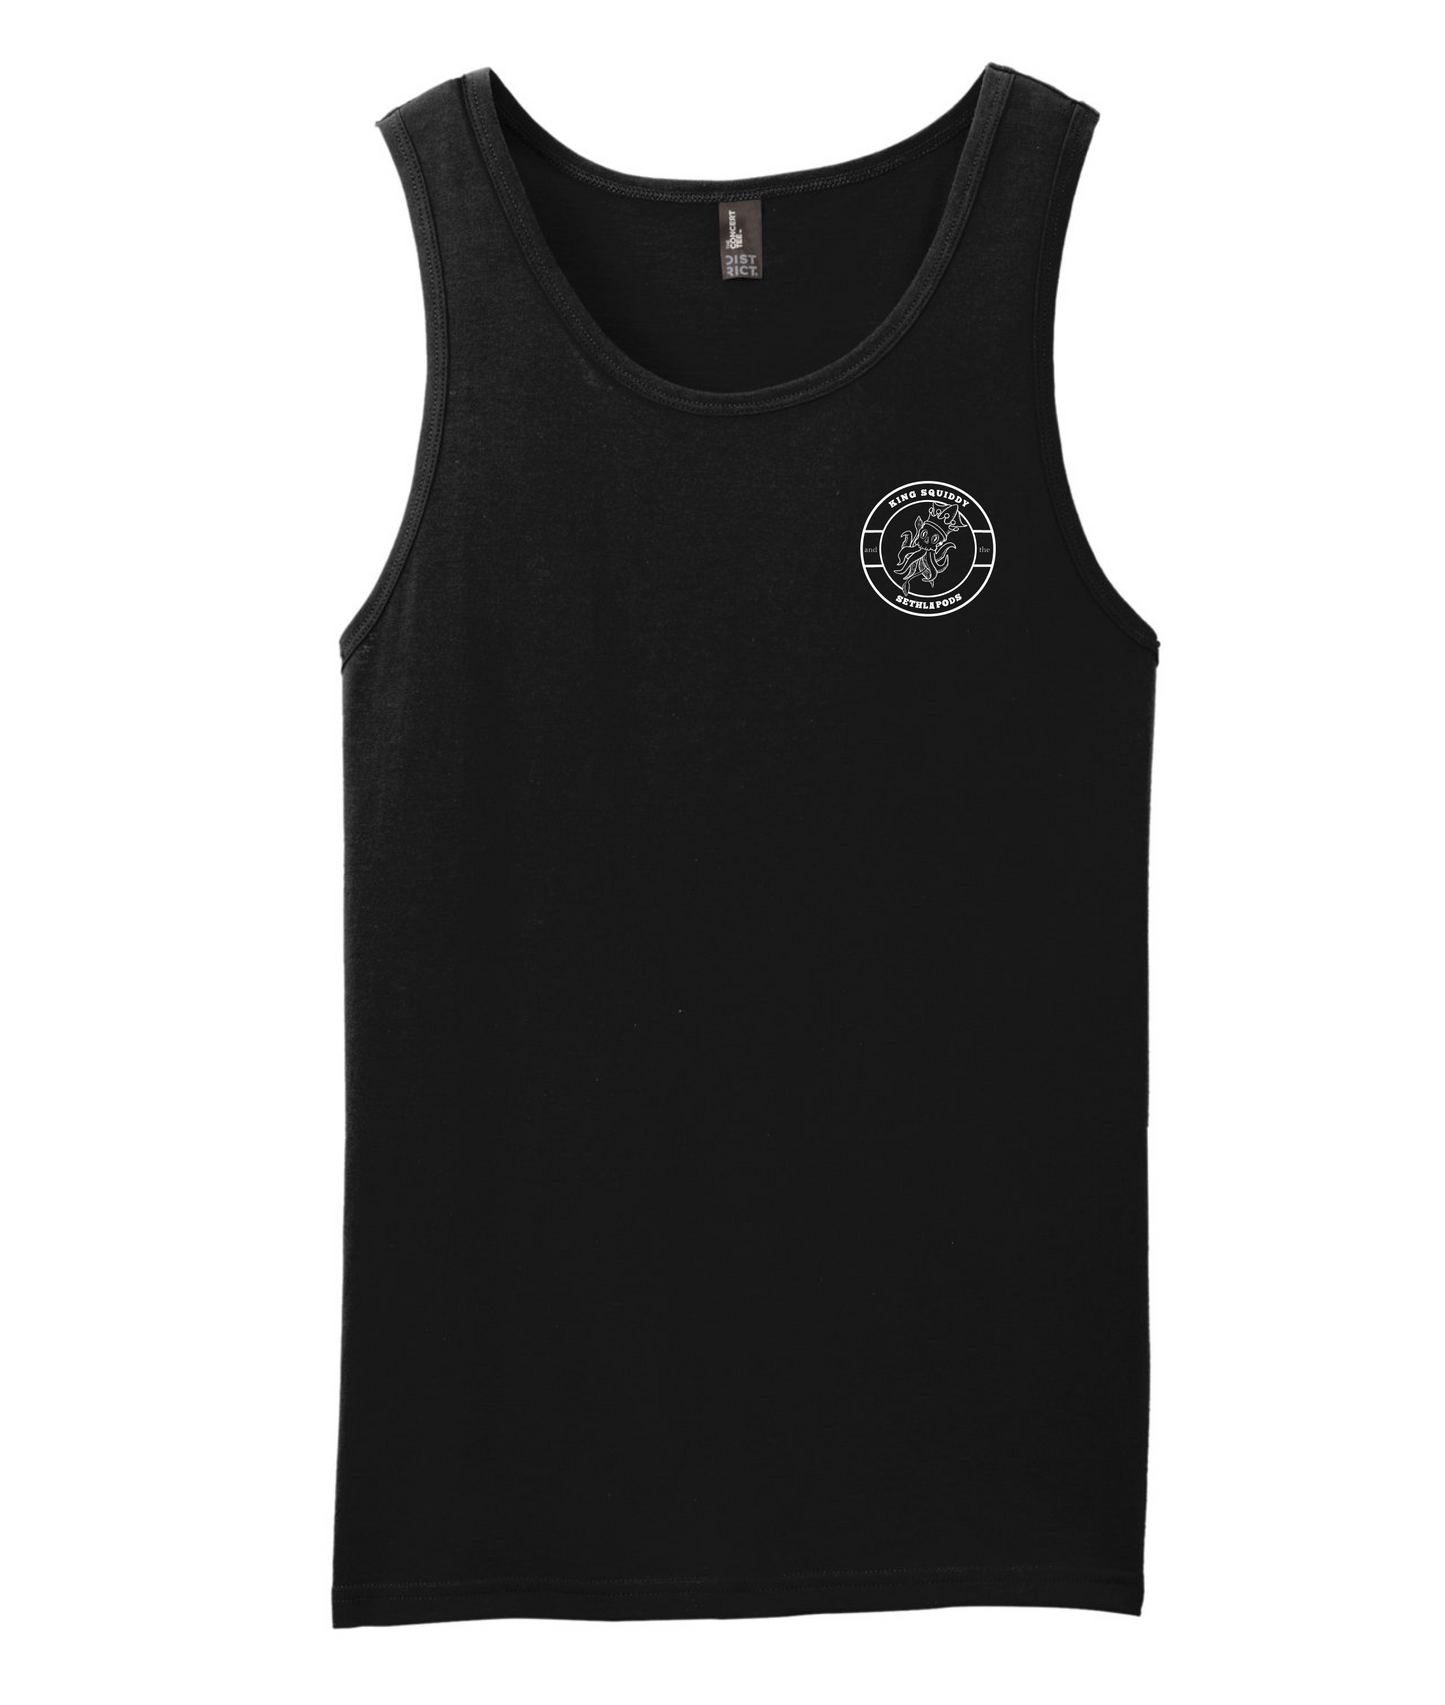 King Squiddy and the Sethlapods - Logo - Black Tank Top